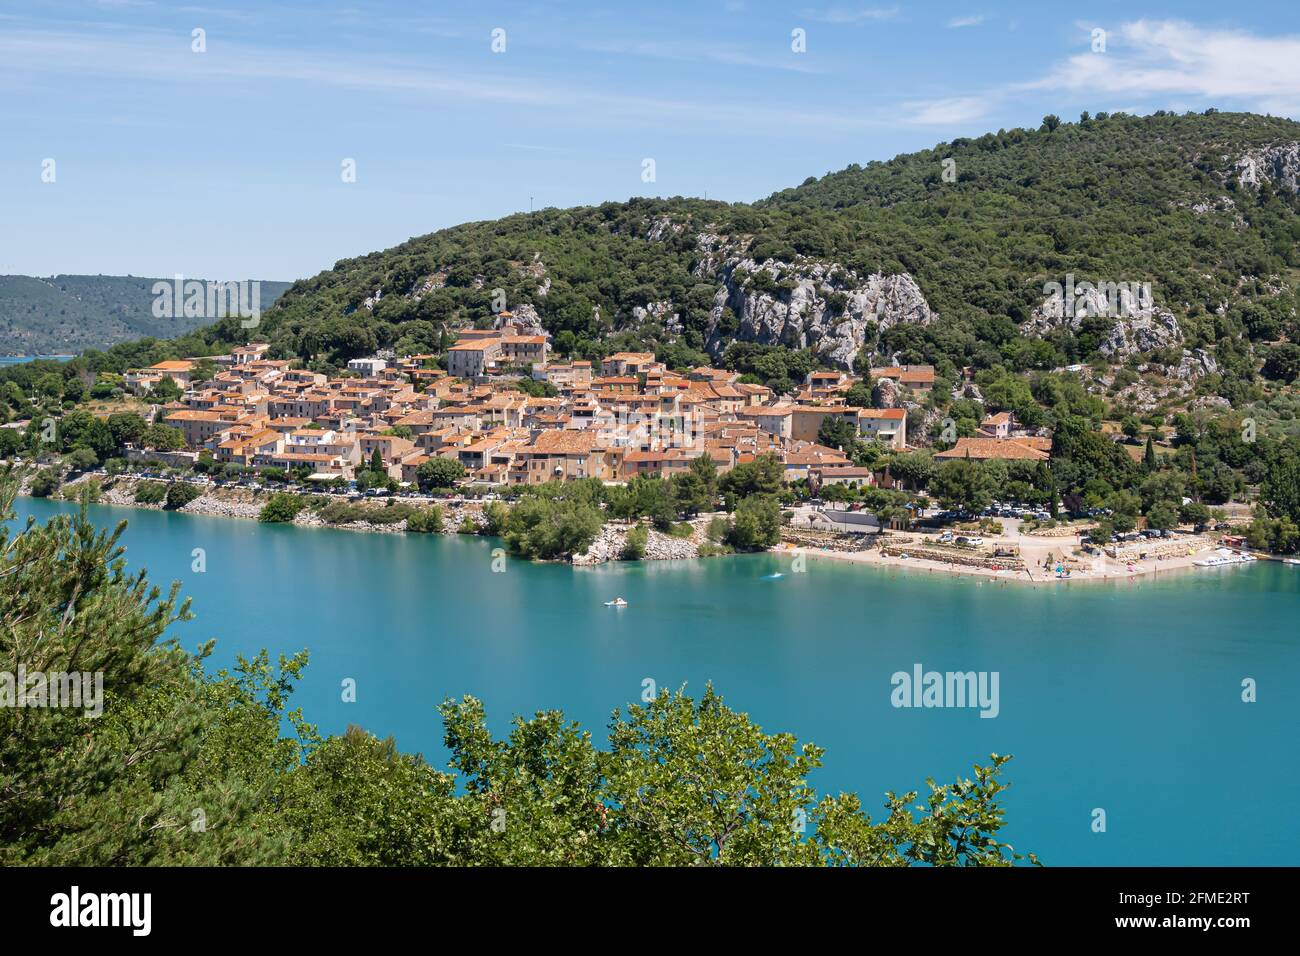 Bauduen, France - July 5, 2020: Bauduen and the Lake of the Holy Cross - Le lac de Sainte Croix in Provence Stock Photo